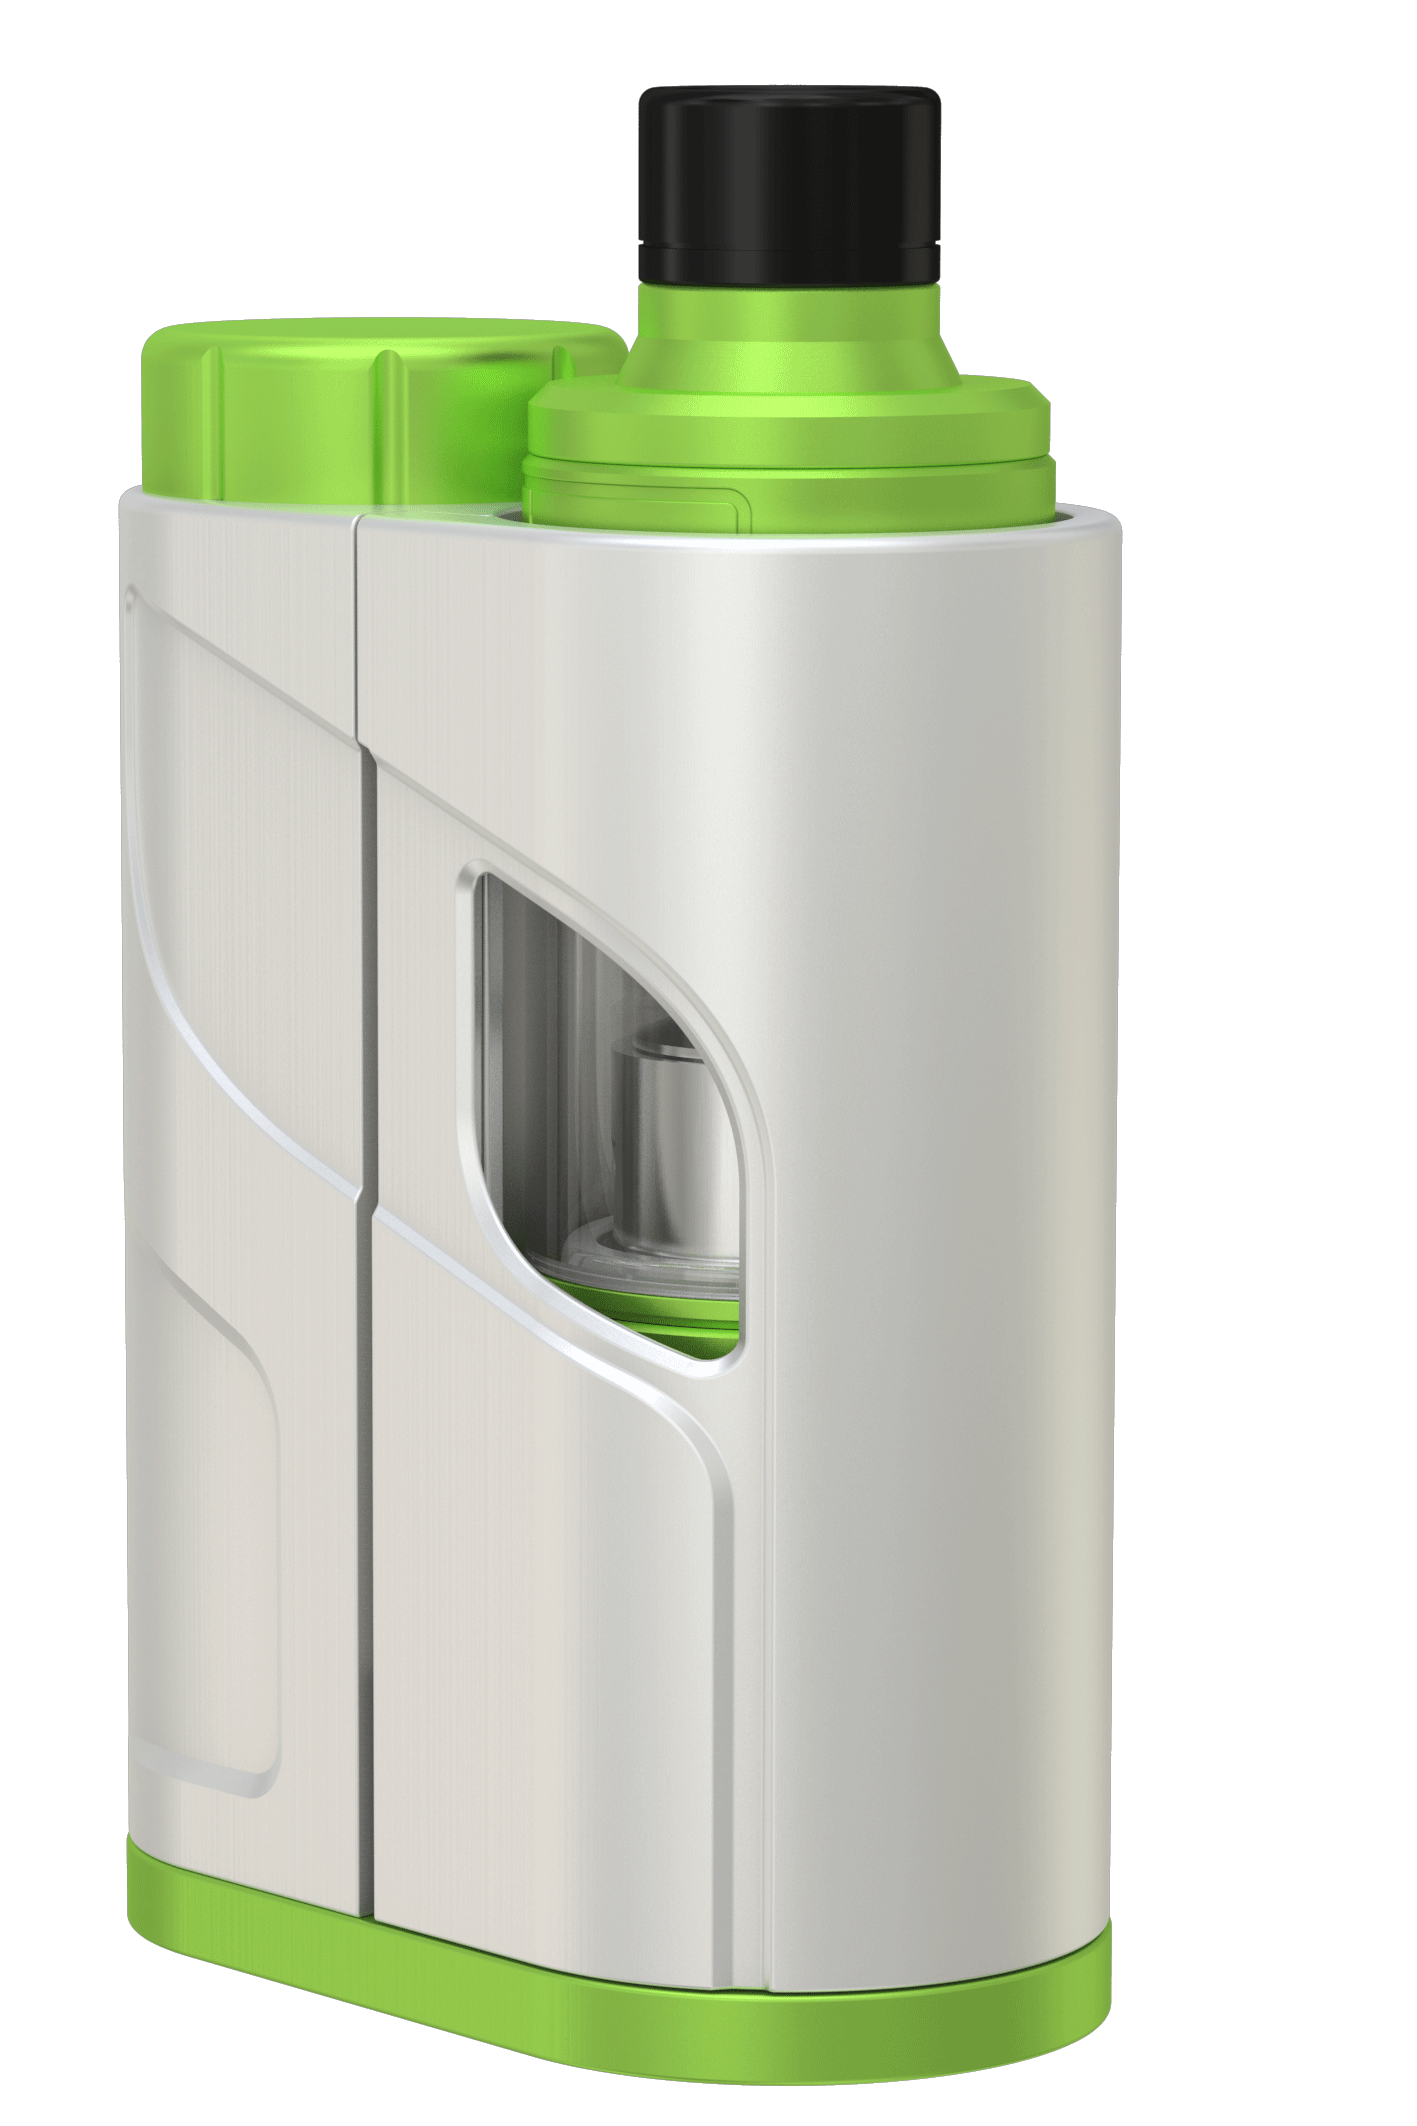 Eleaf iKonn Total with Ello Mini XL Full Kit 5.5ml INNOVATIVE DESIGN OF SLIDING COVER The iKonn Total comes with a new design of sliding cover that not only cleverly reveals e liquid consumption but also protects the tank inside